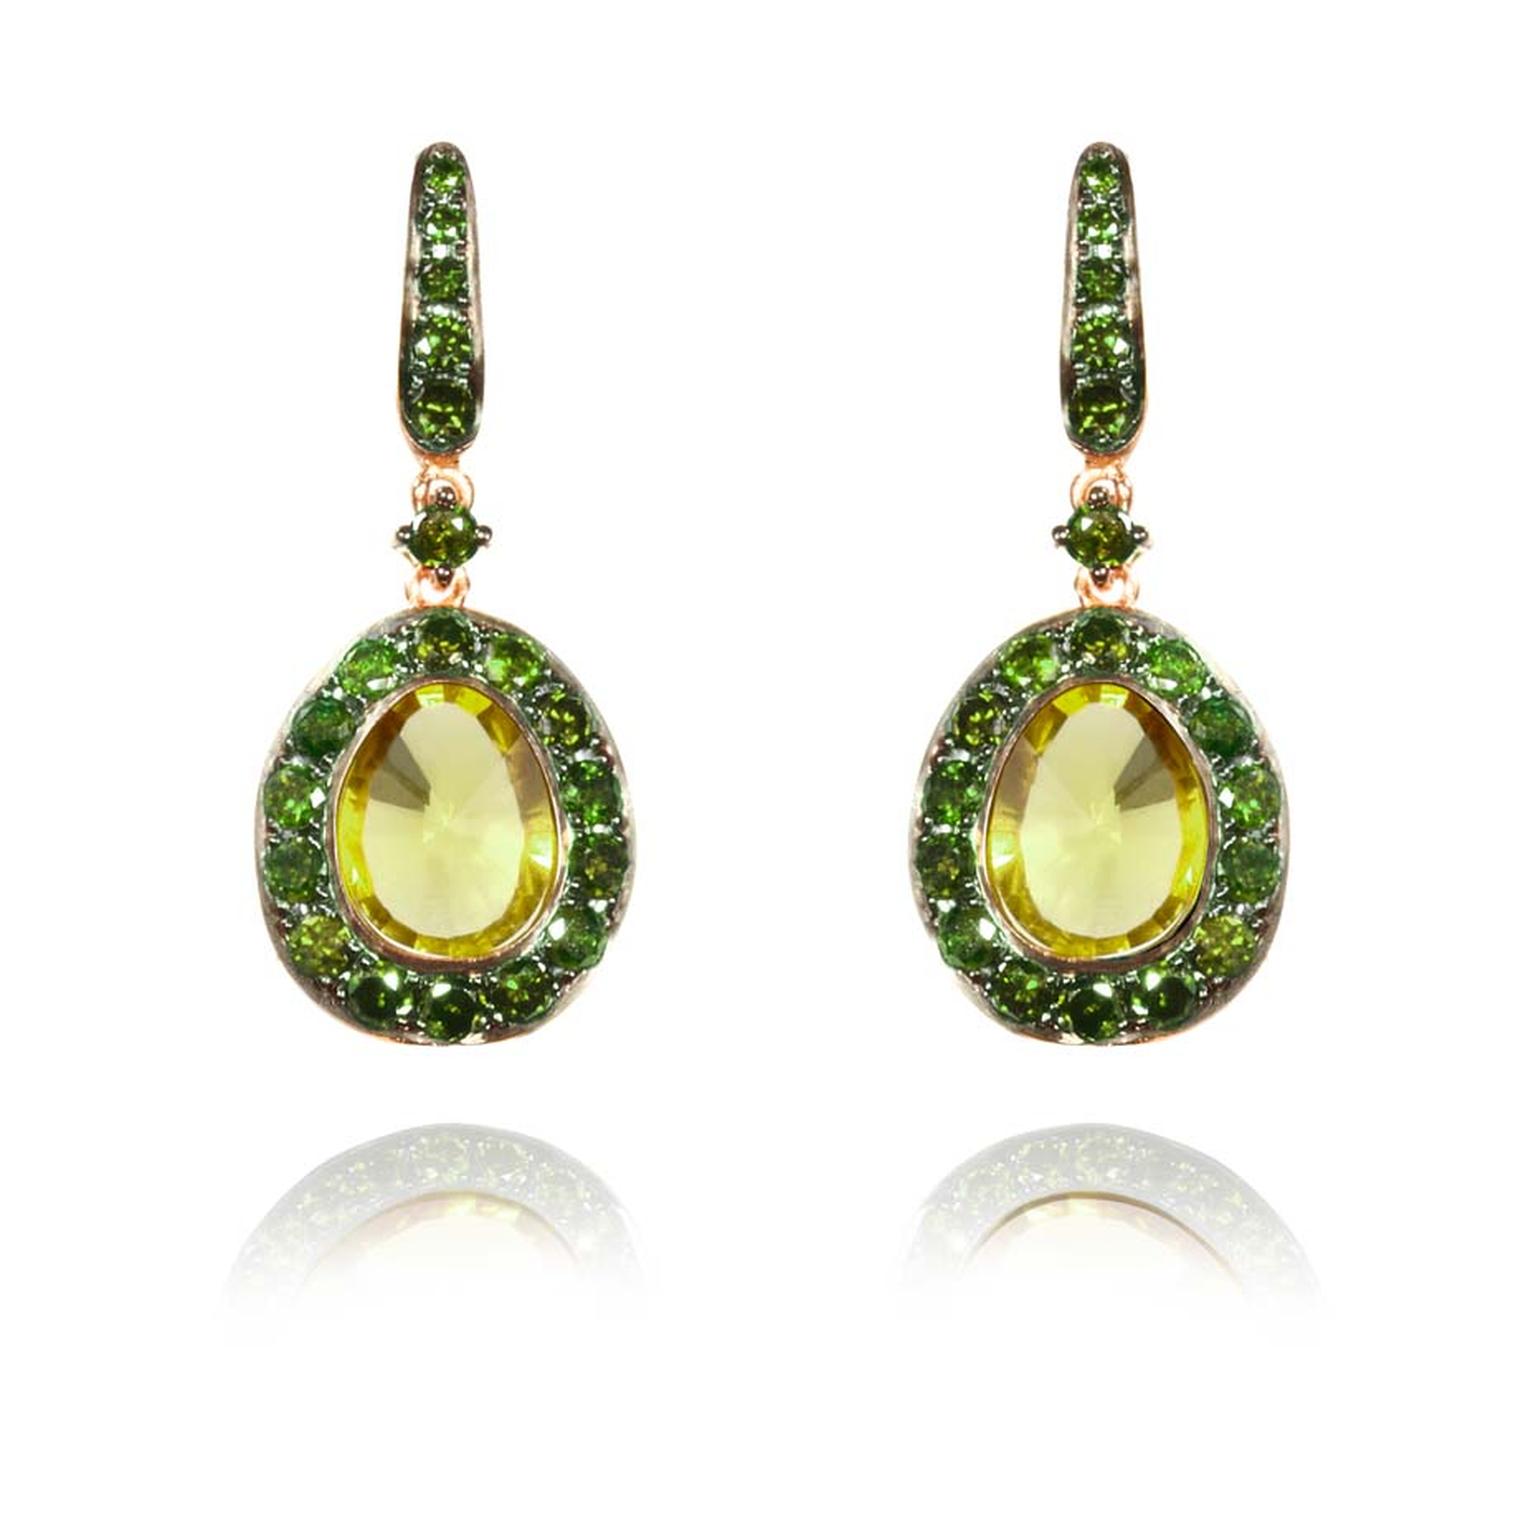 Annoushka Dusty Diamonds rose gold earrings with green diamonds and centre olive quartz.